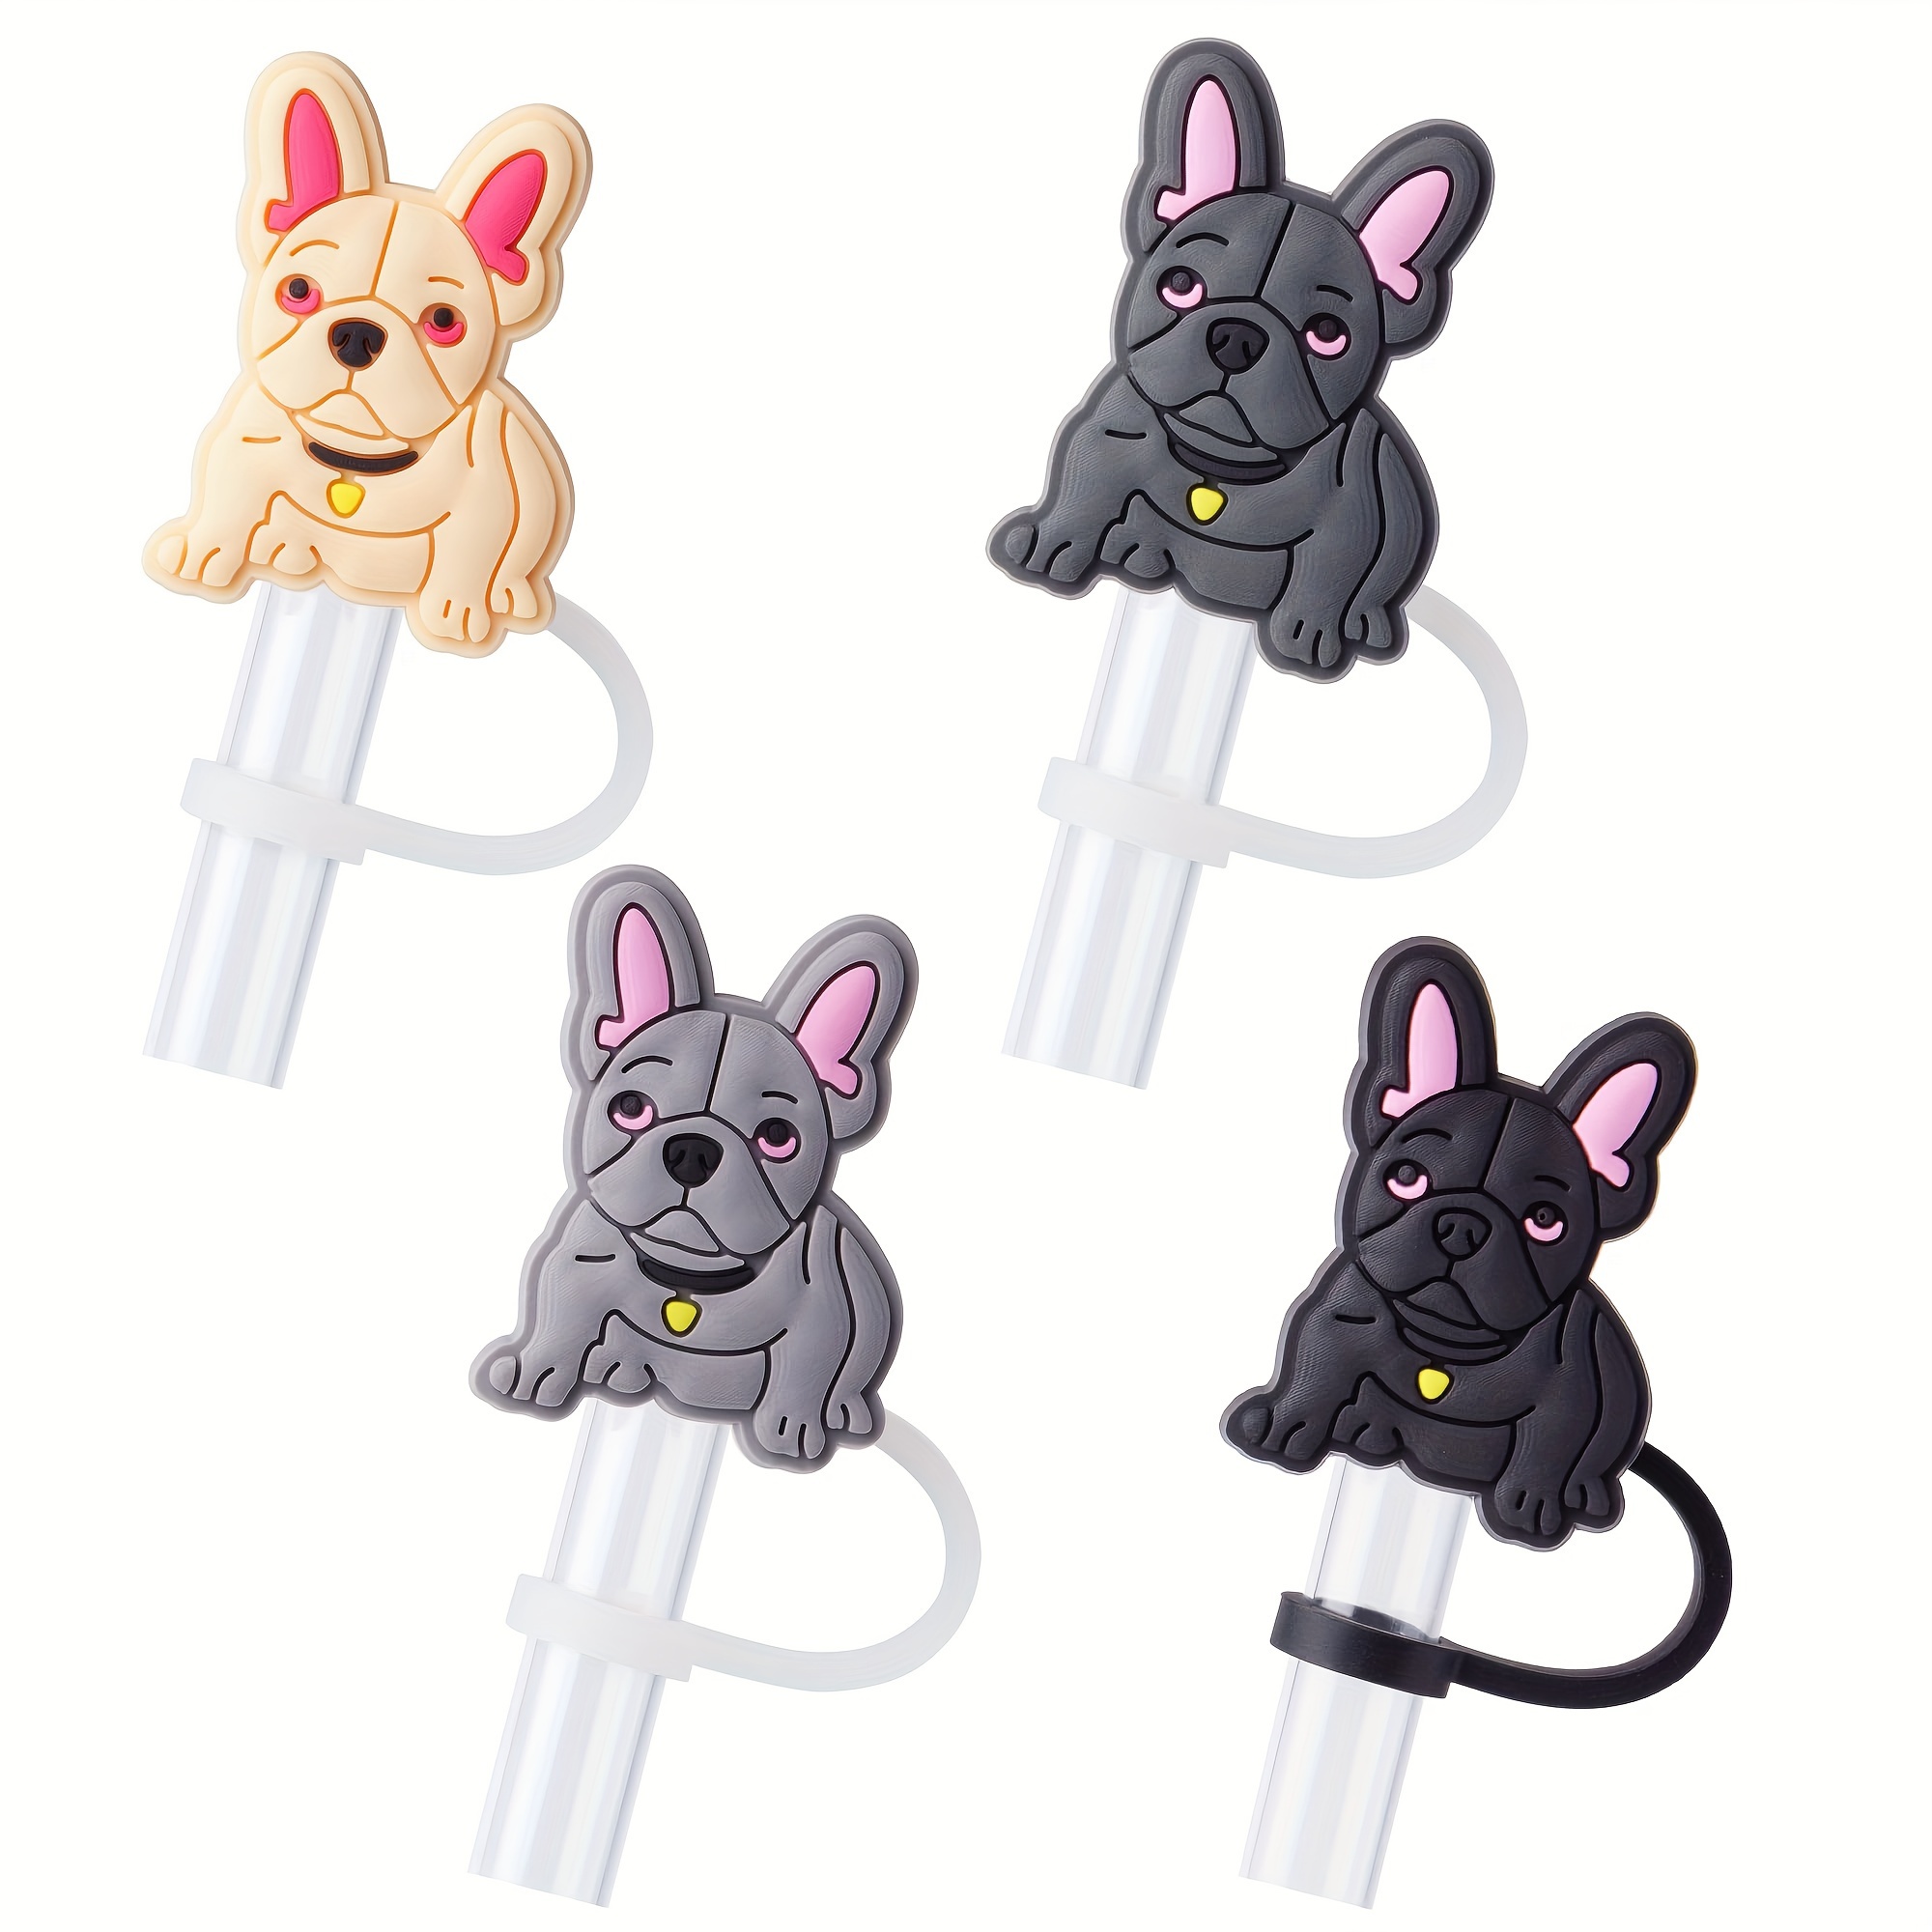 

4-pack French Bulldog Silicone Straw Covers - Dustproof & Reusable Caps For Stanley 20, 30 & 40 Oz Tumblers With Handles, Fits 10mm/0.4in Diameter Straws